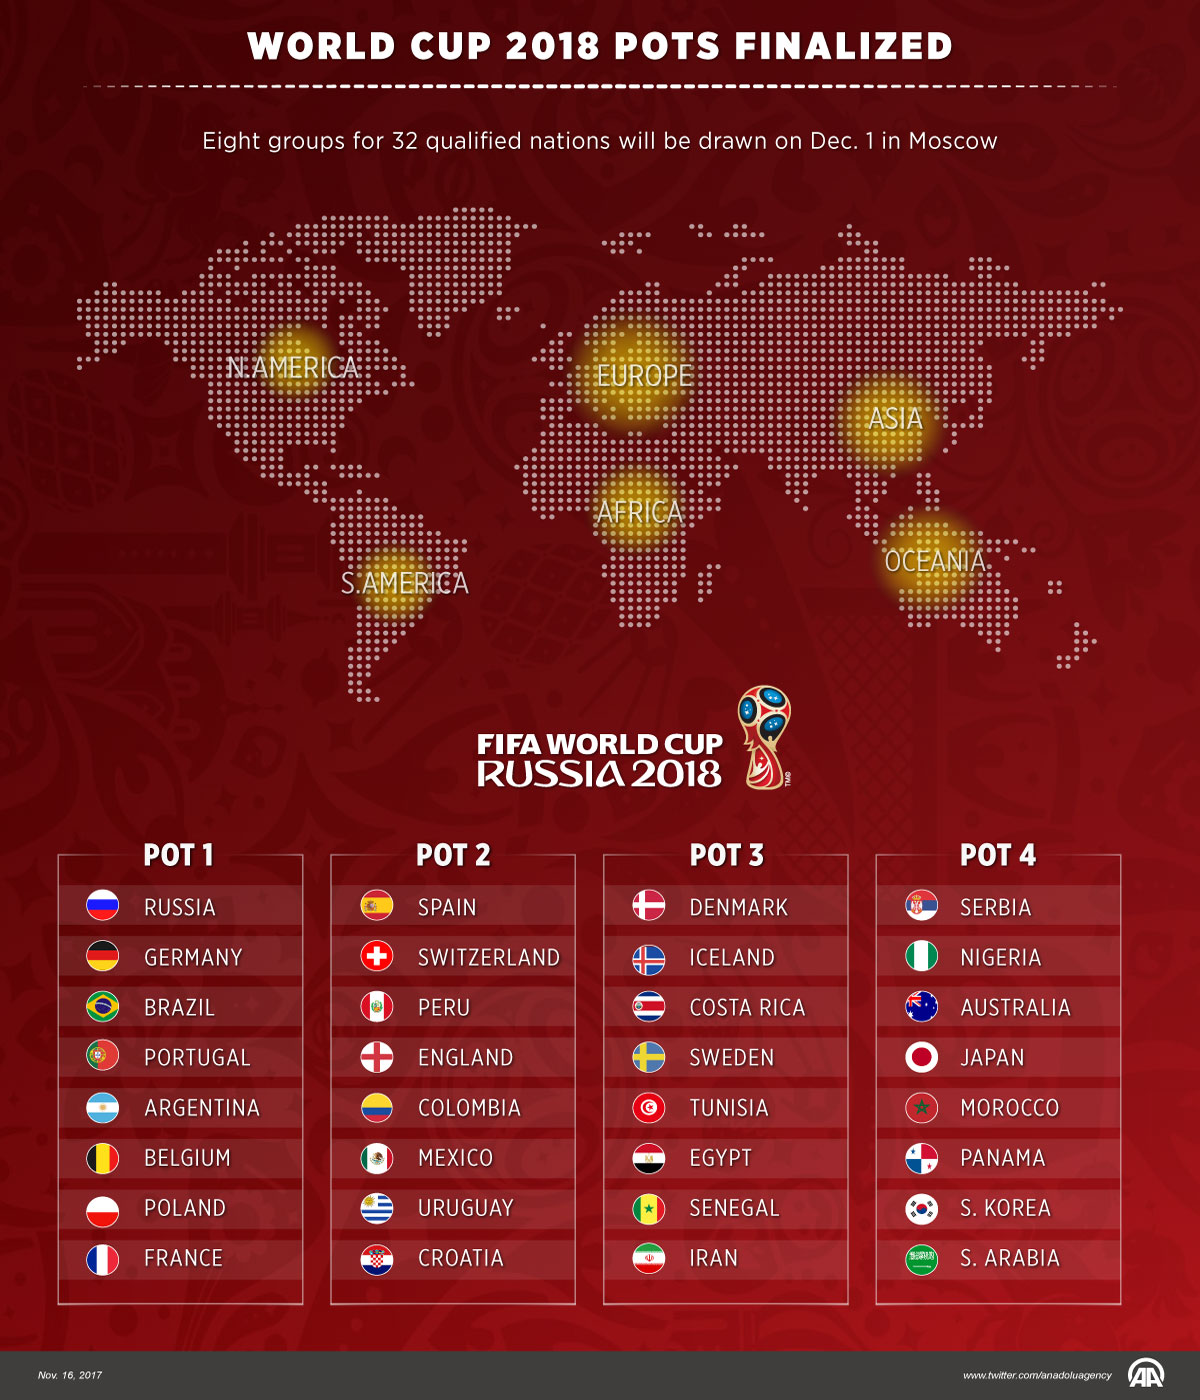 World Cup 2018 pots finalized